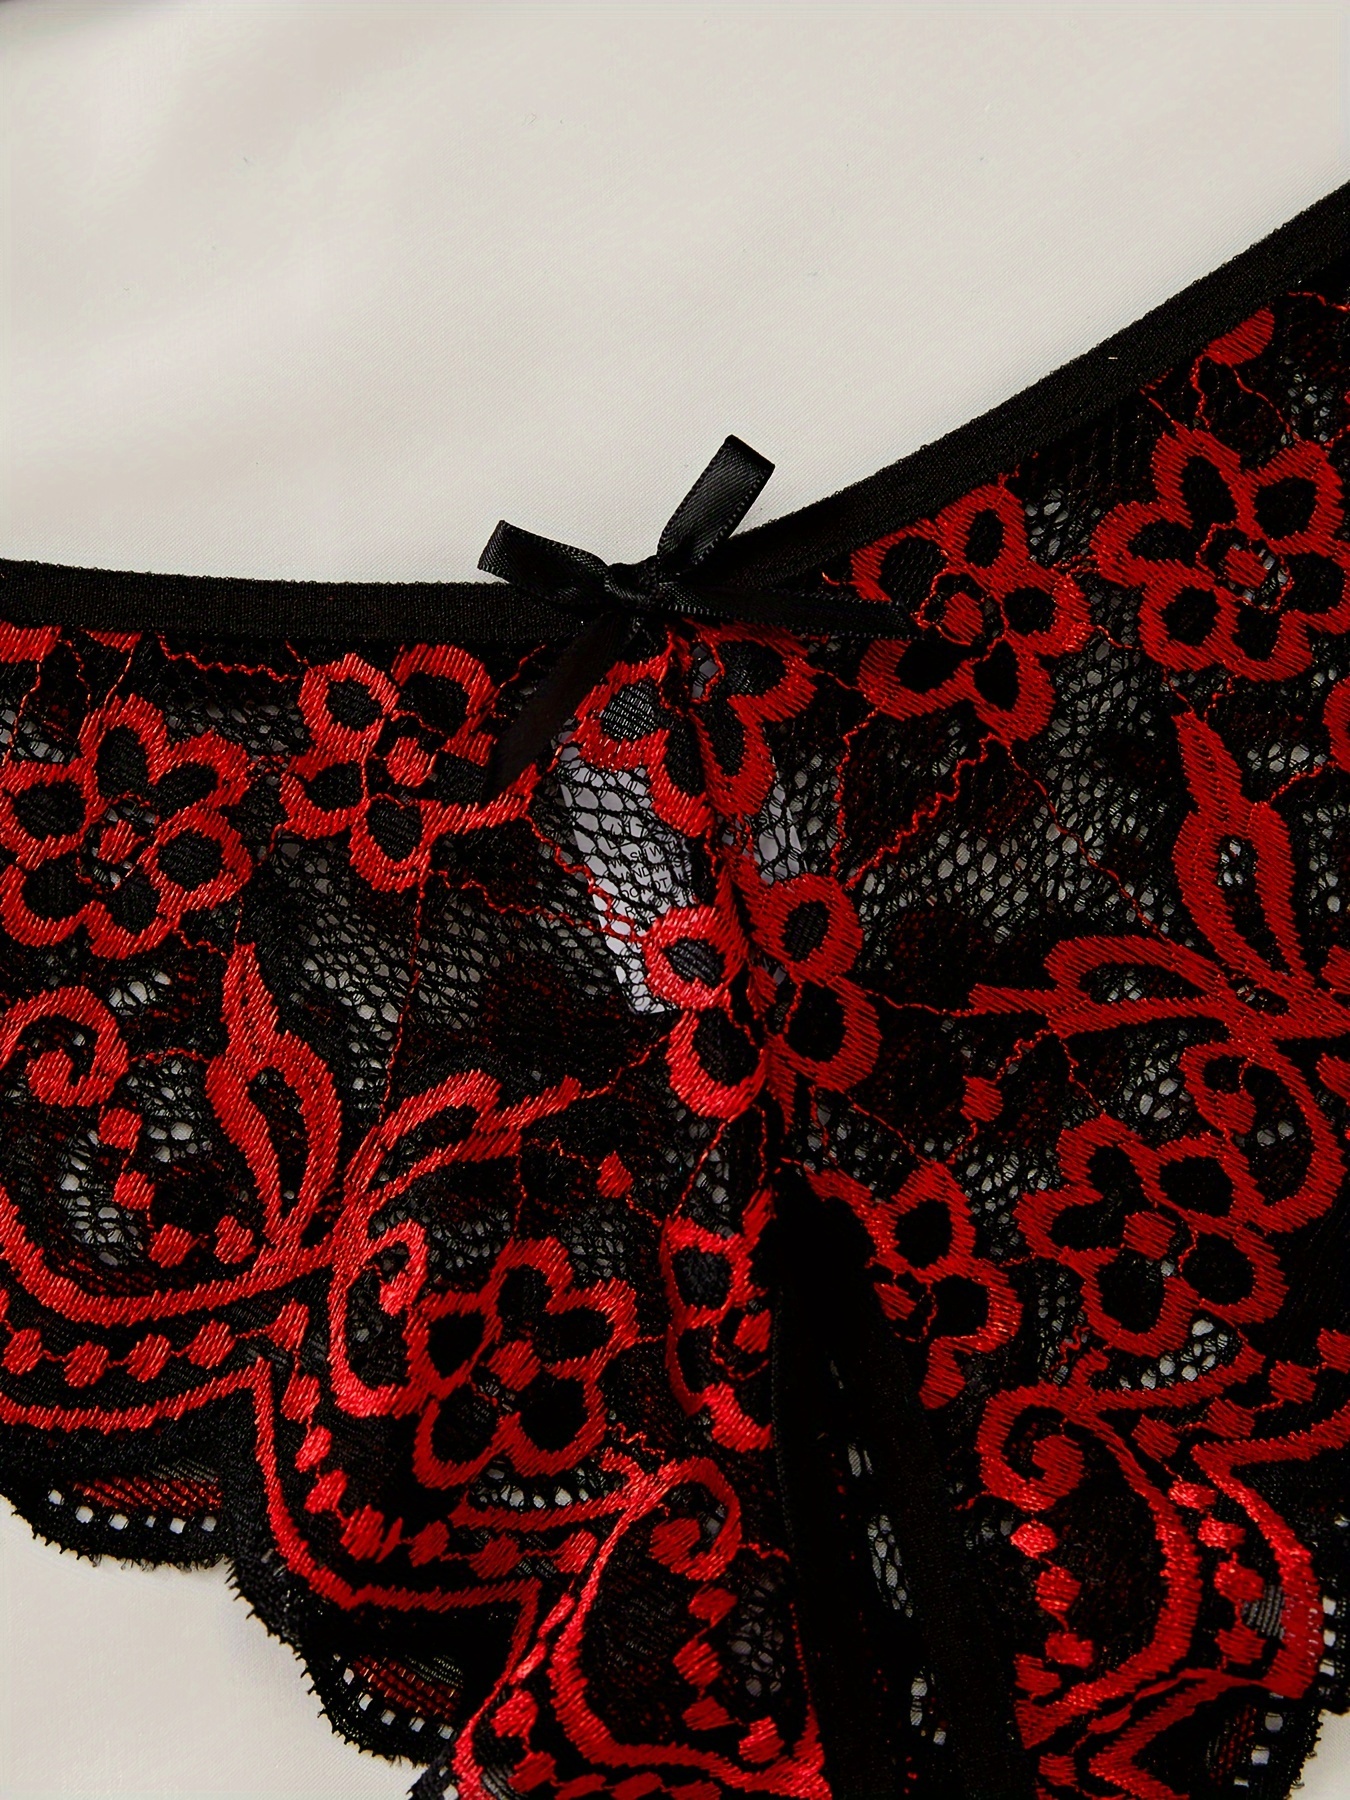 Red and Black Scalloped Lace Open Crotch Tanga Crotchless Panties